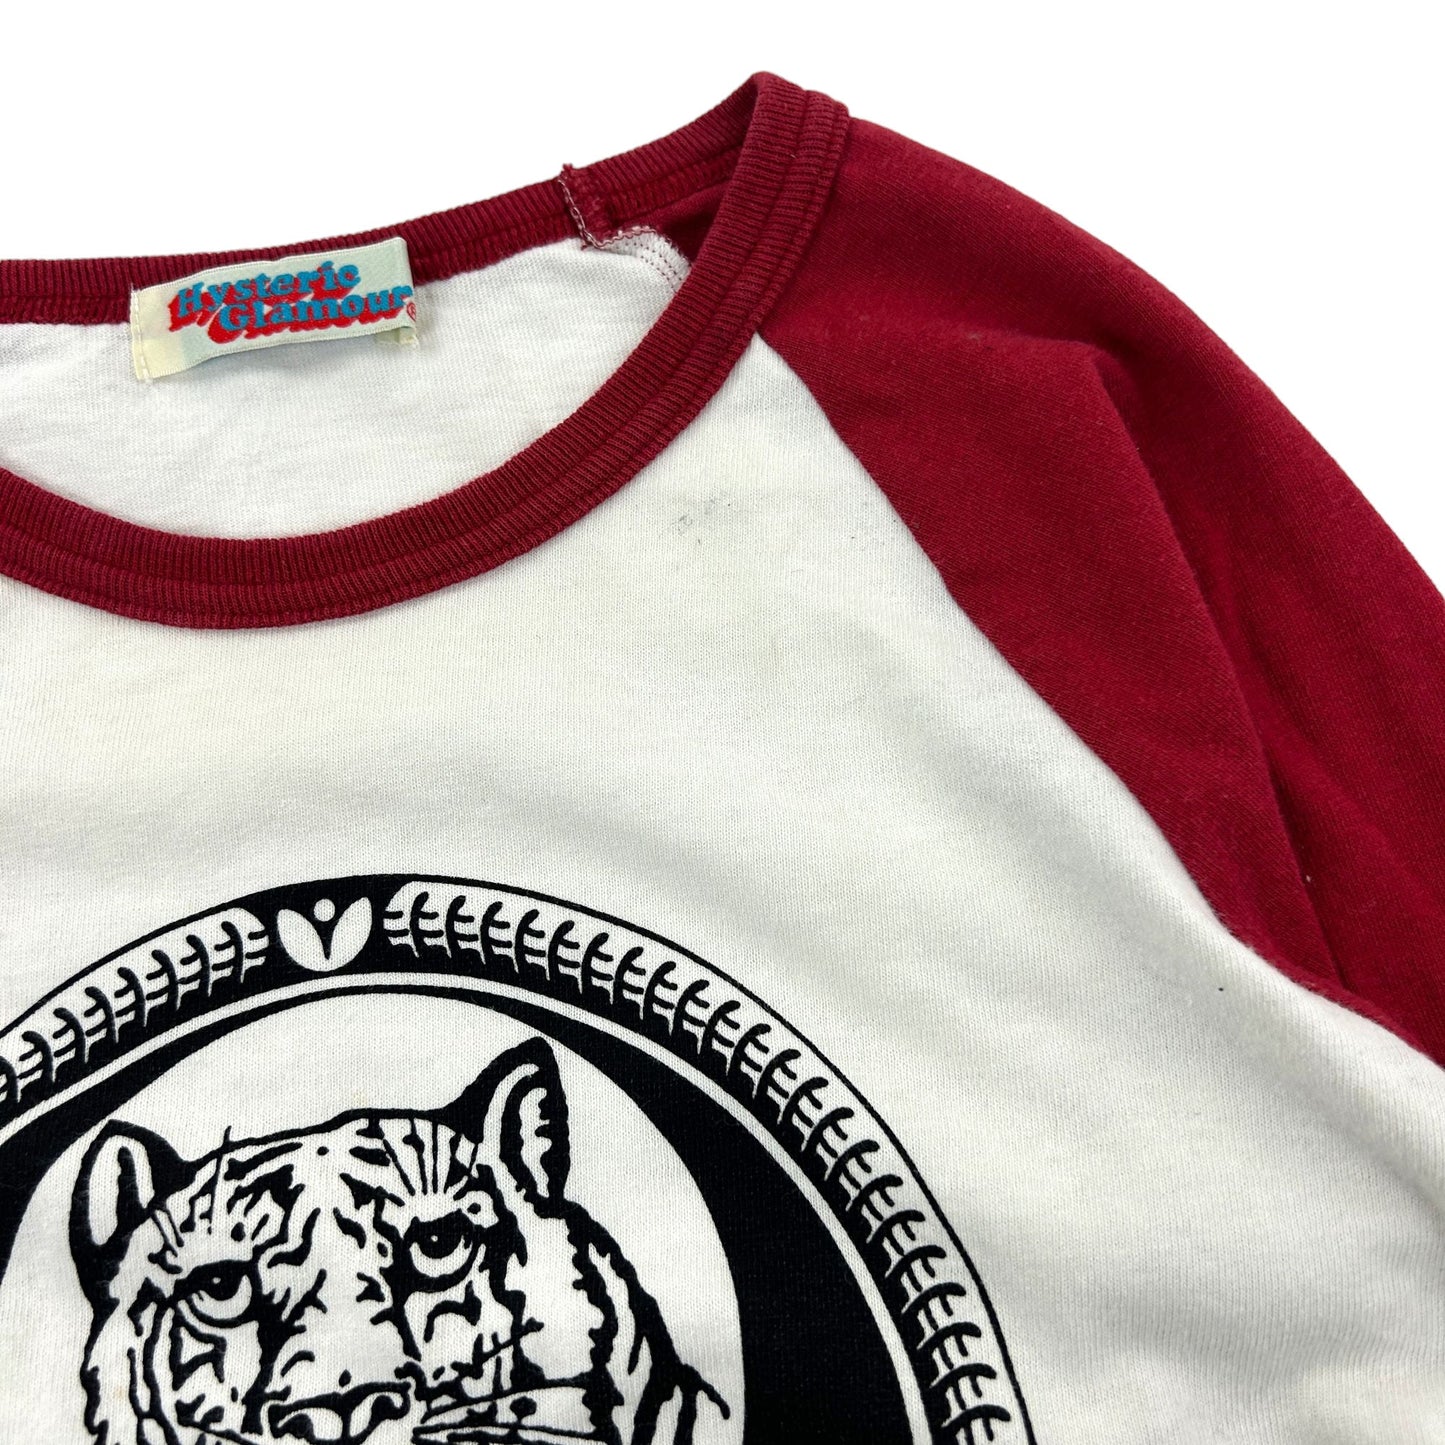 Vintage Hysteric Glamour Tiger Graphic Raglan T-Shirt Woman's Size S